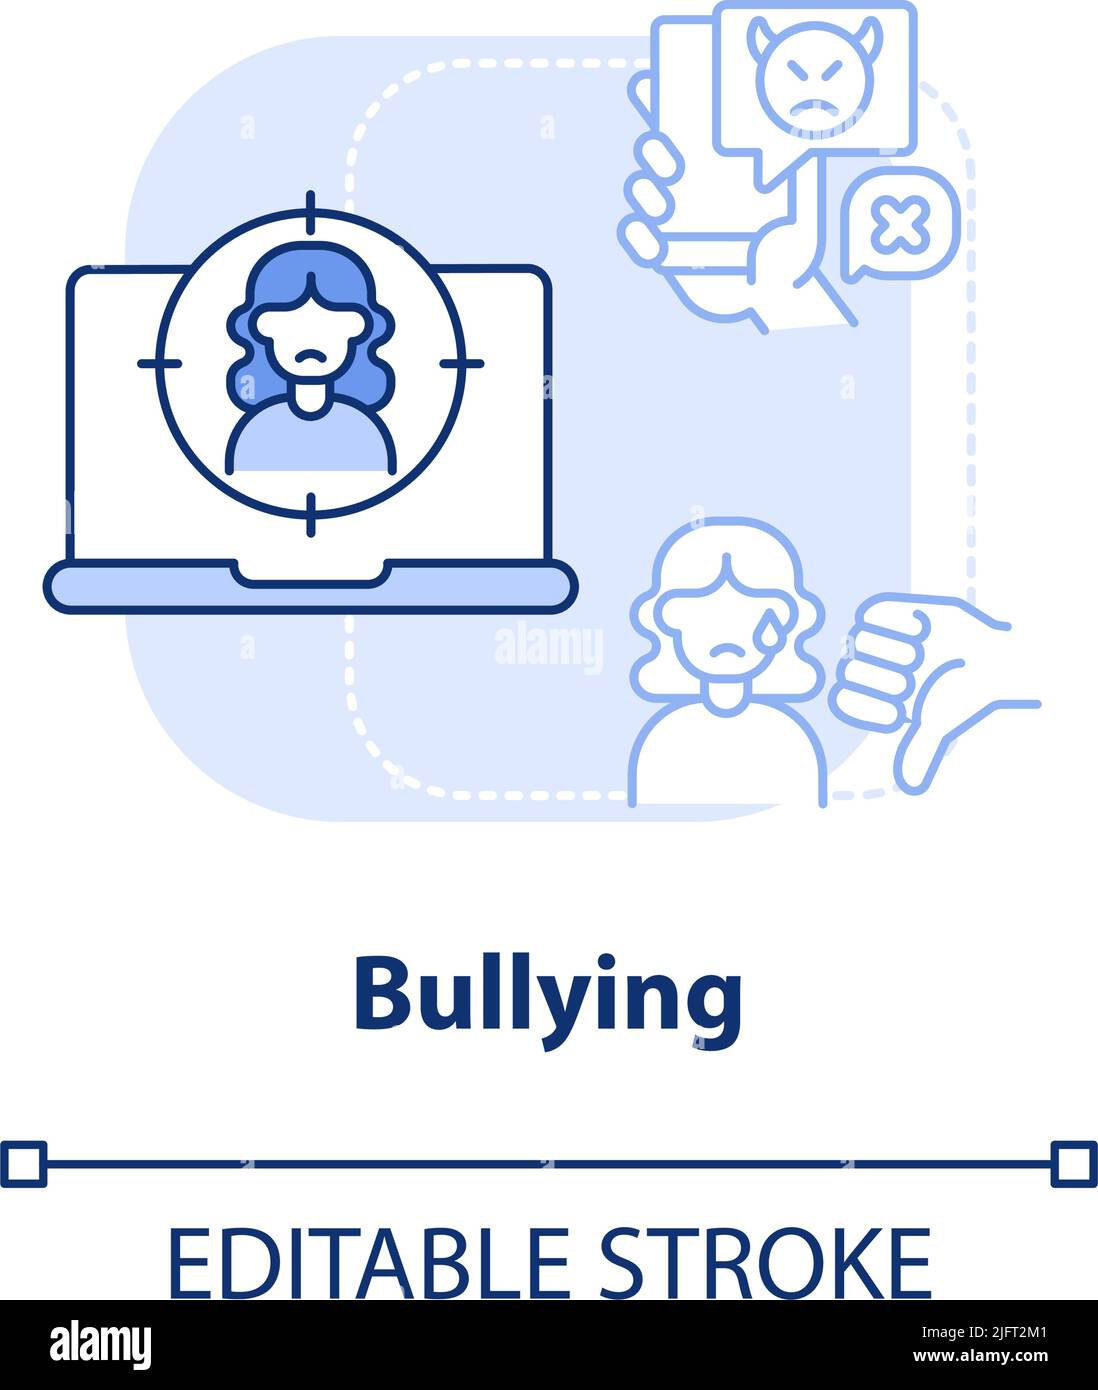 Bullying light blue concept icon Stock Vector